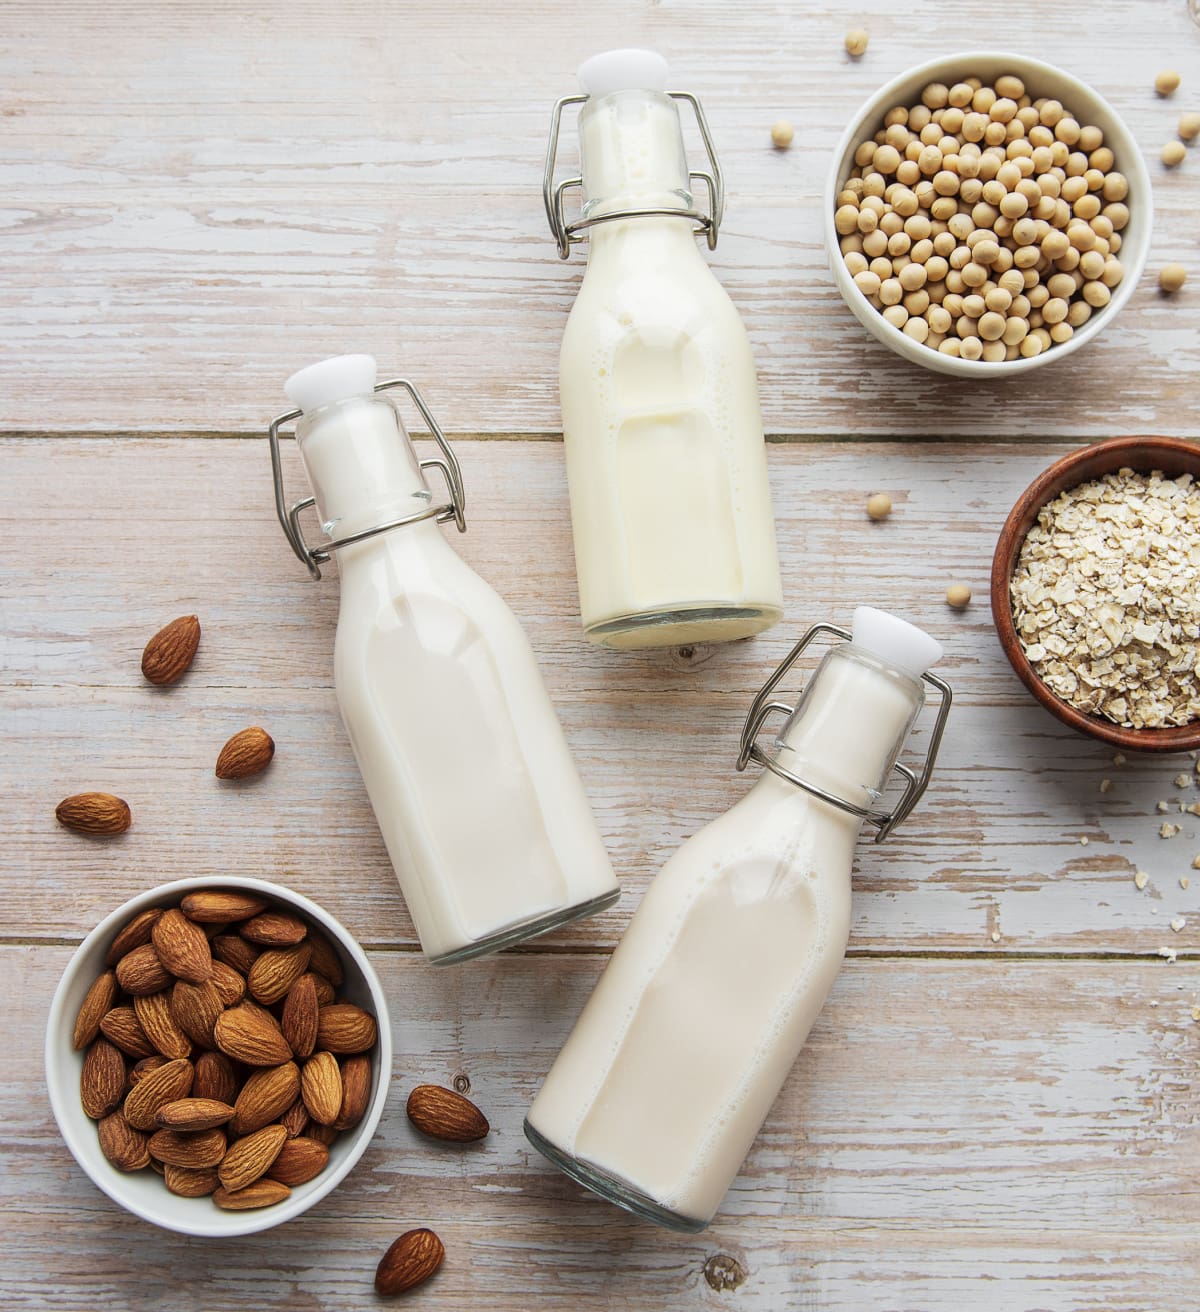 These 9 Vegan Milk Brands Will Make Your Pantry Ethical!